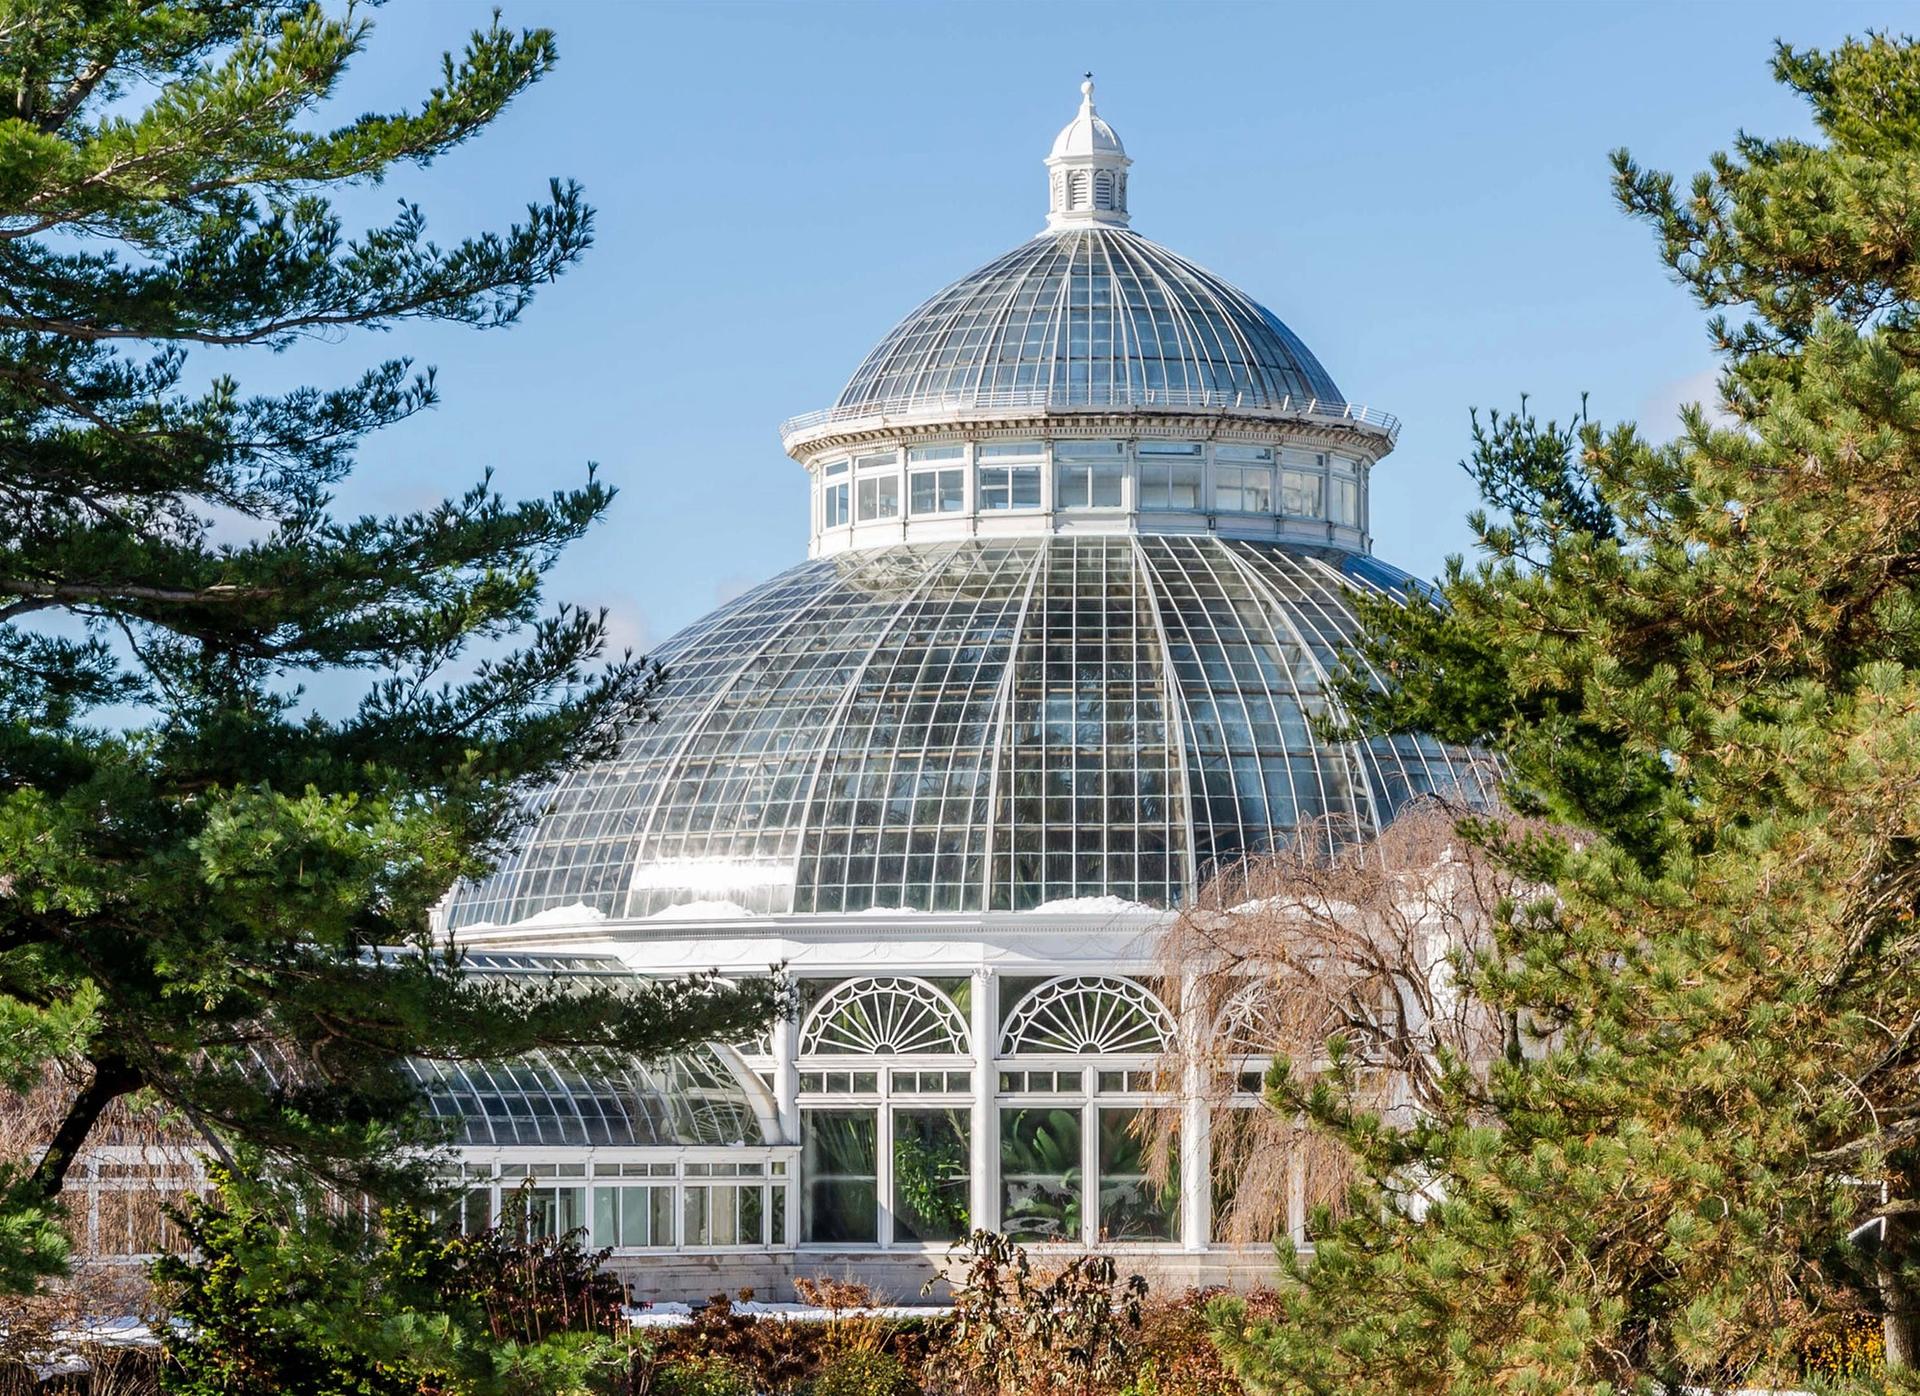 The palm dome of the New York Botanical Garden NYBG Photo